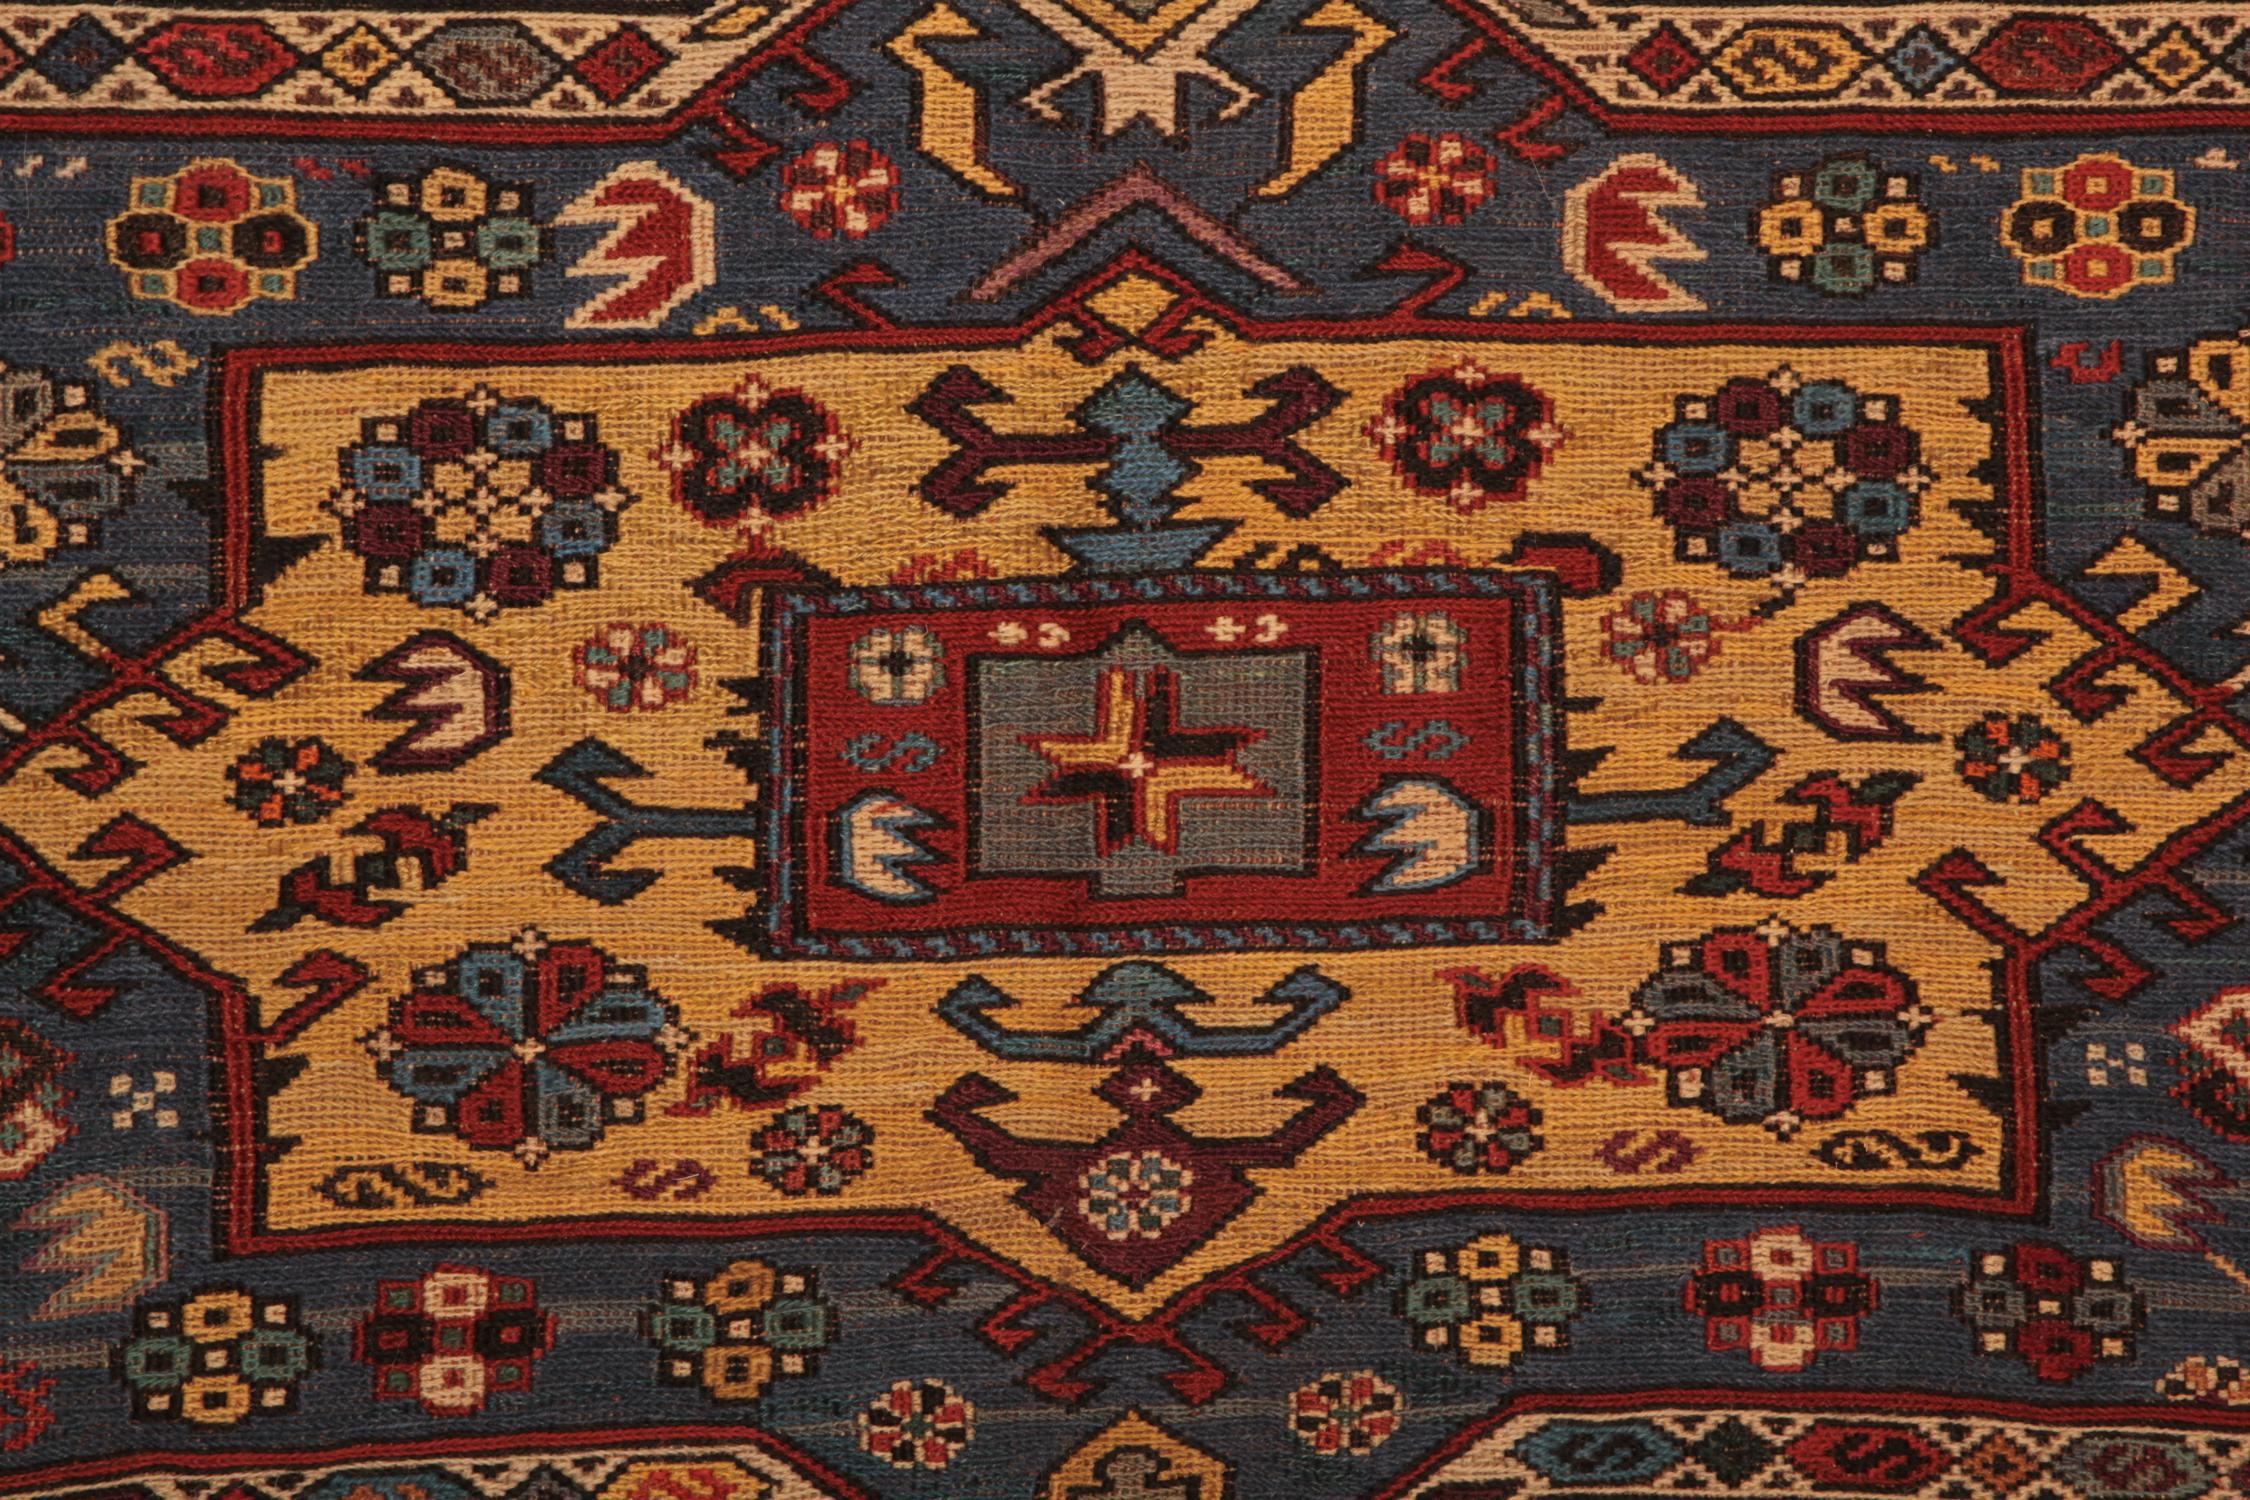 This handmade carpet Caucasian Kilim is defined is a Sumak: Caucasia is an area in the northwest of Azerbaijan Sumak refers to the weaving technique. This Kilim rug is completely handmade with the best wool and cotton. The dyes are organic. The